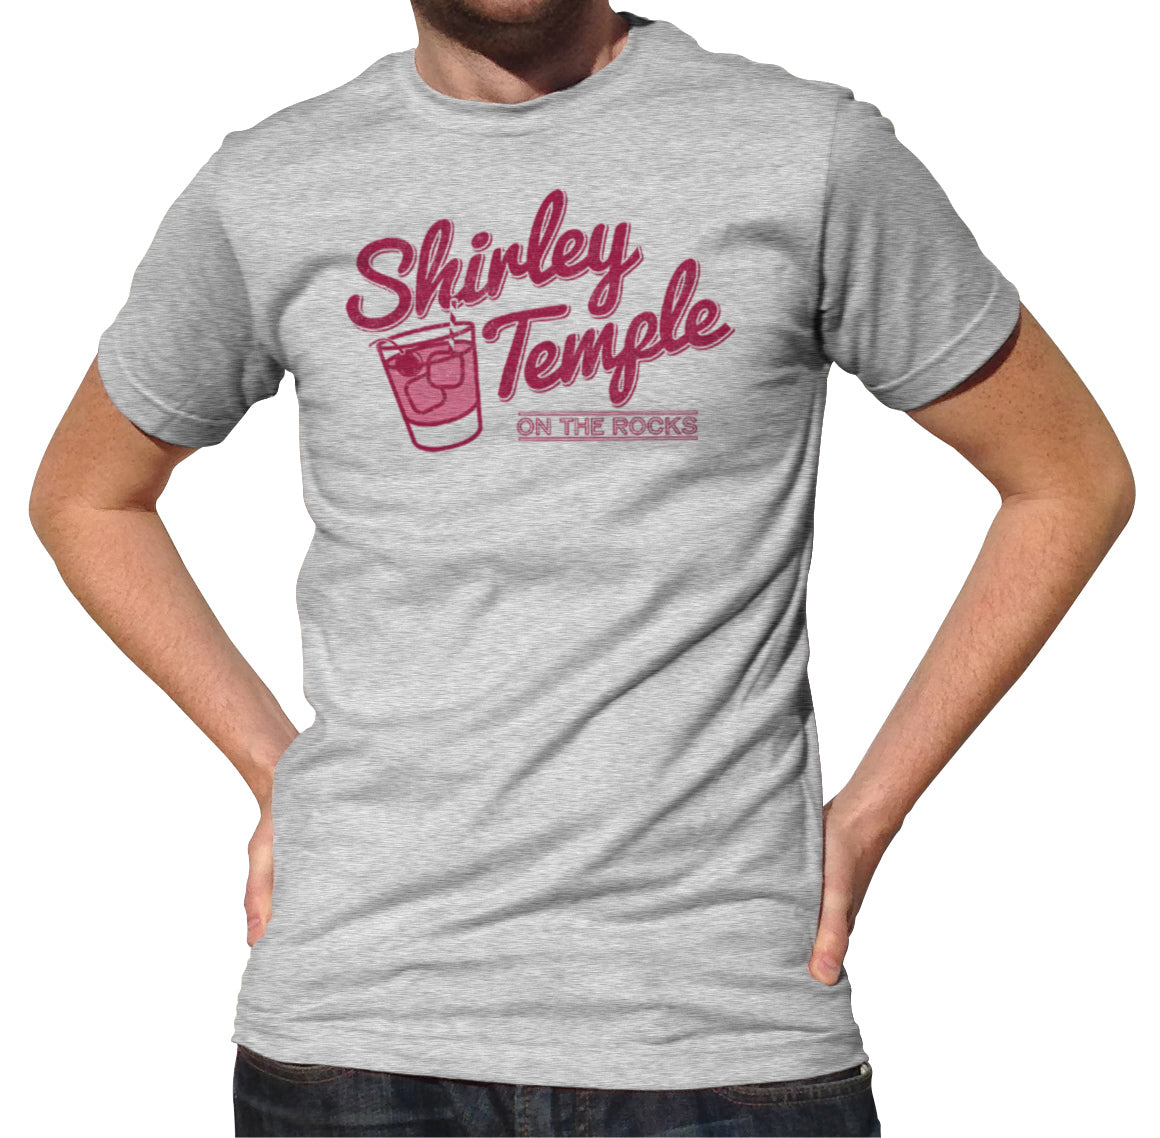 Men's Shirley Temple On The Rocks T-Shirt